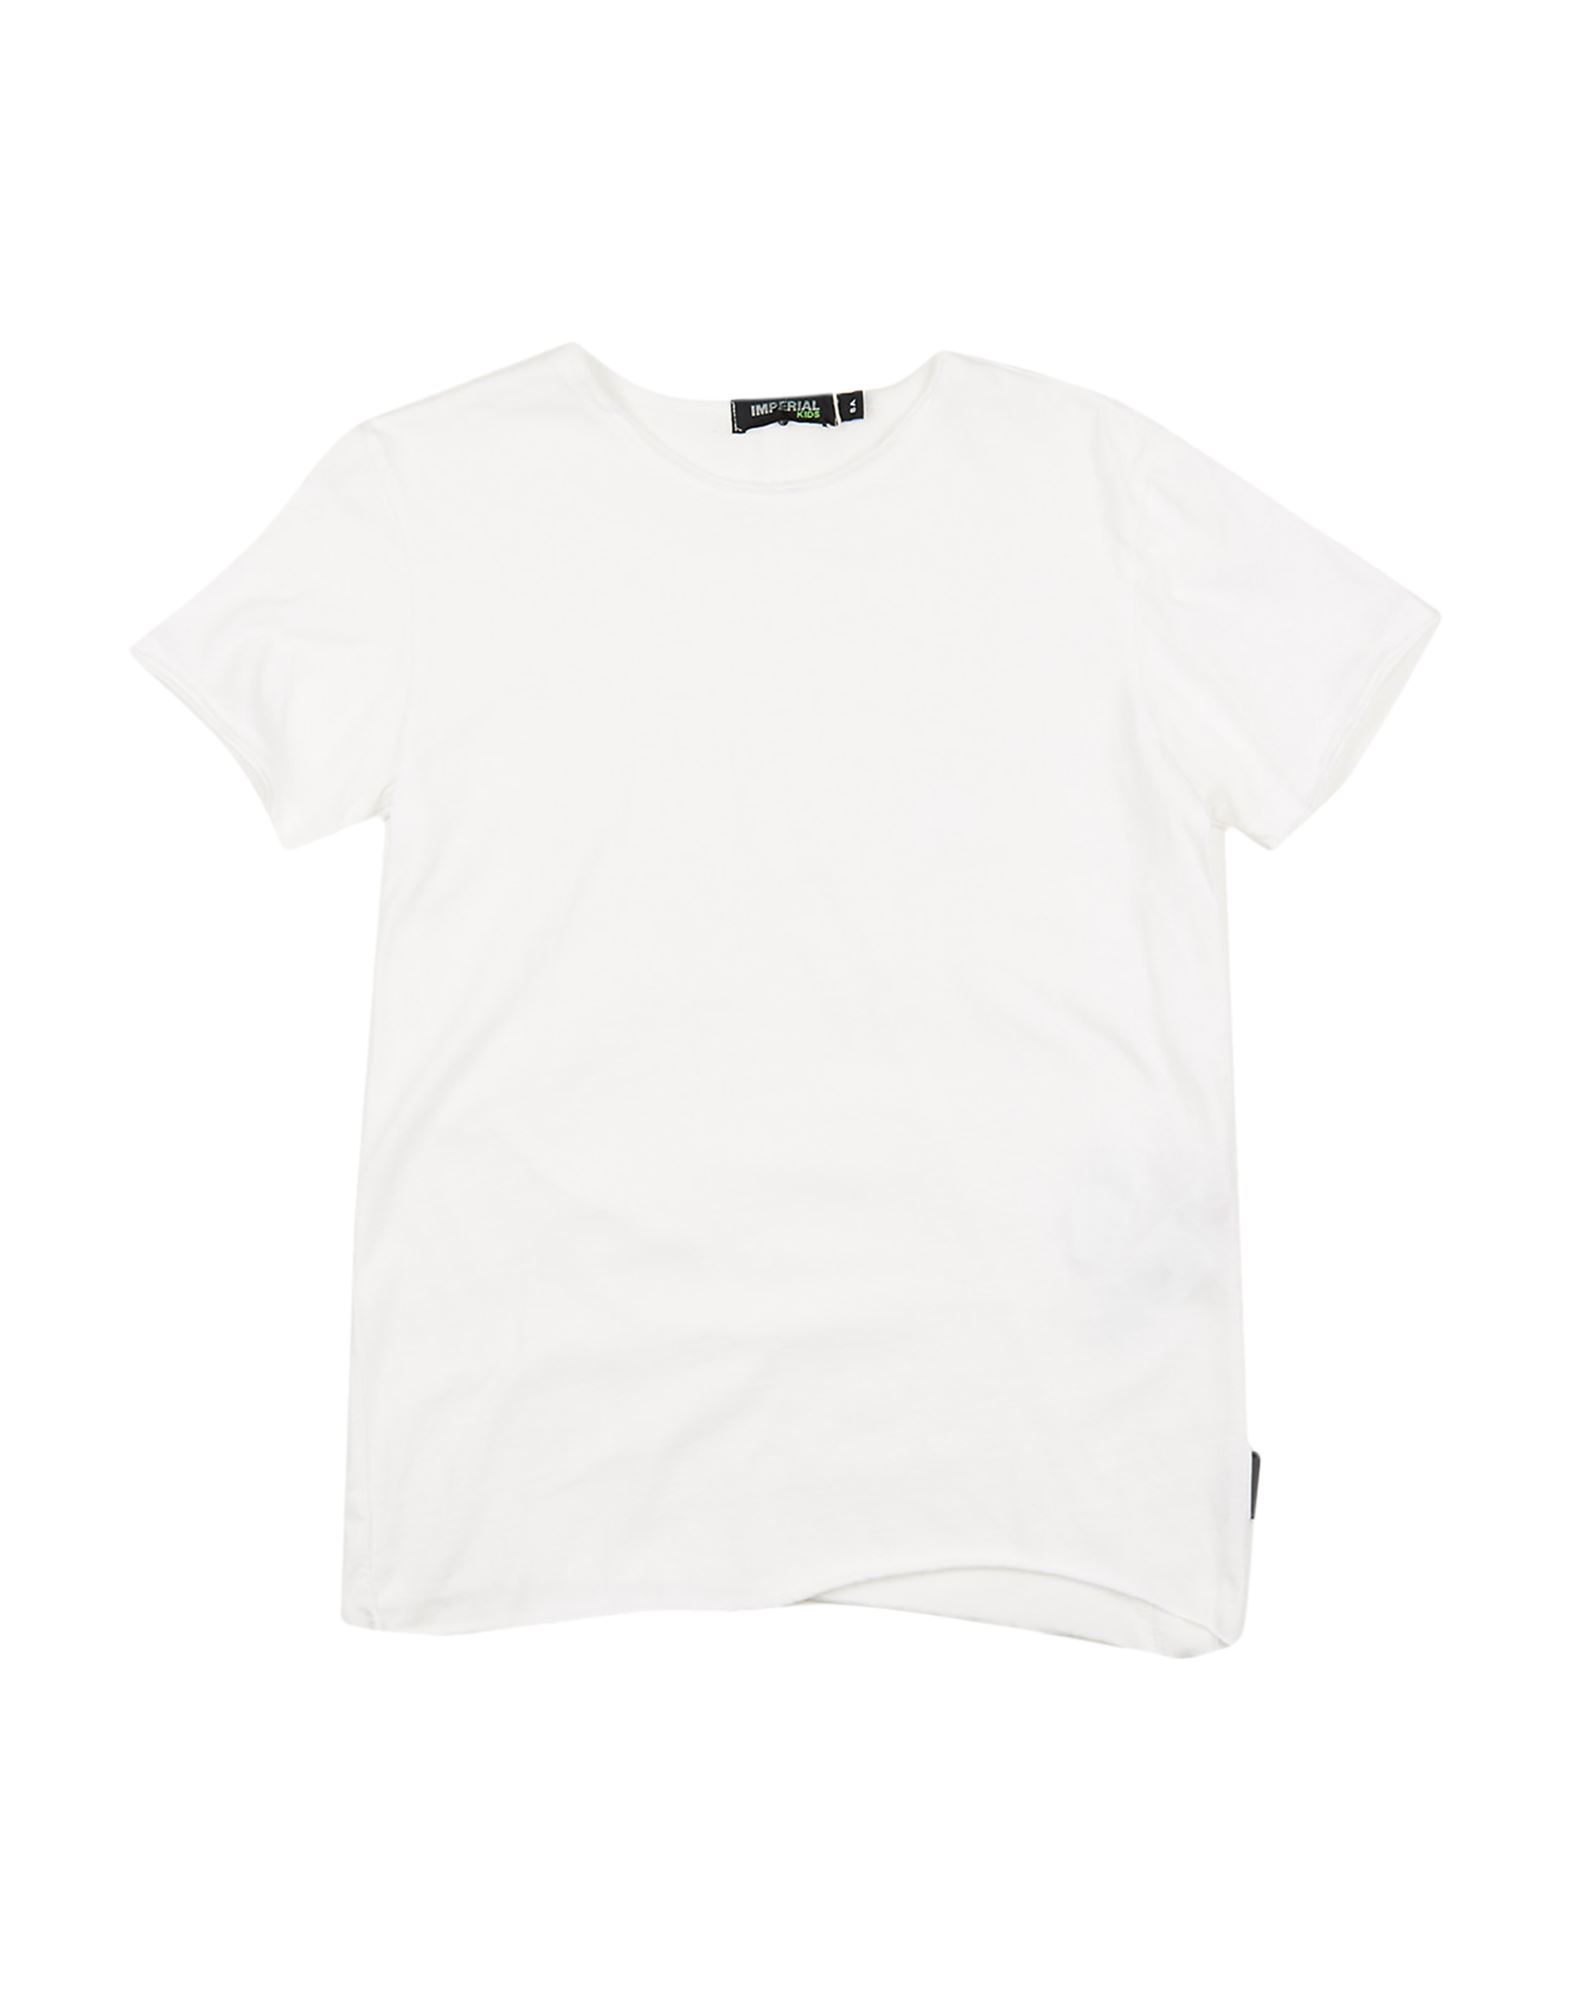 IMPERIAL T-shirts Kinder Off white von IMPERIAL